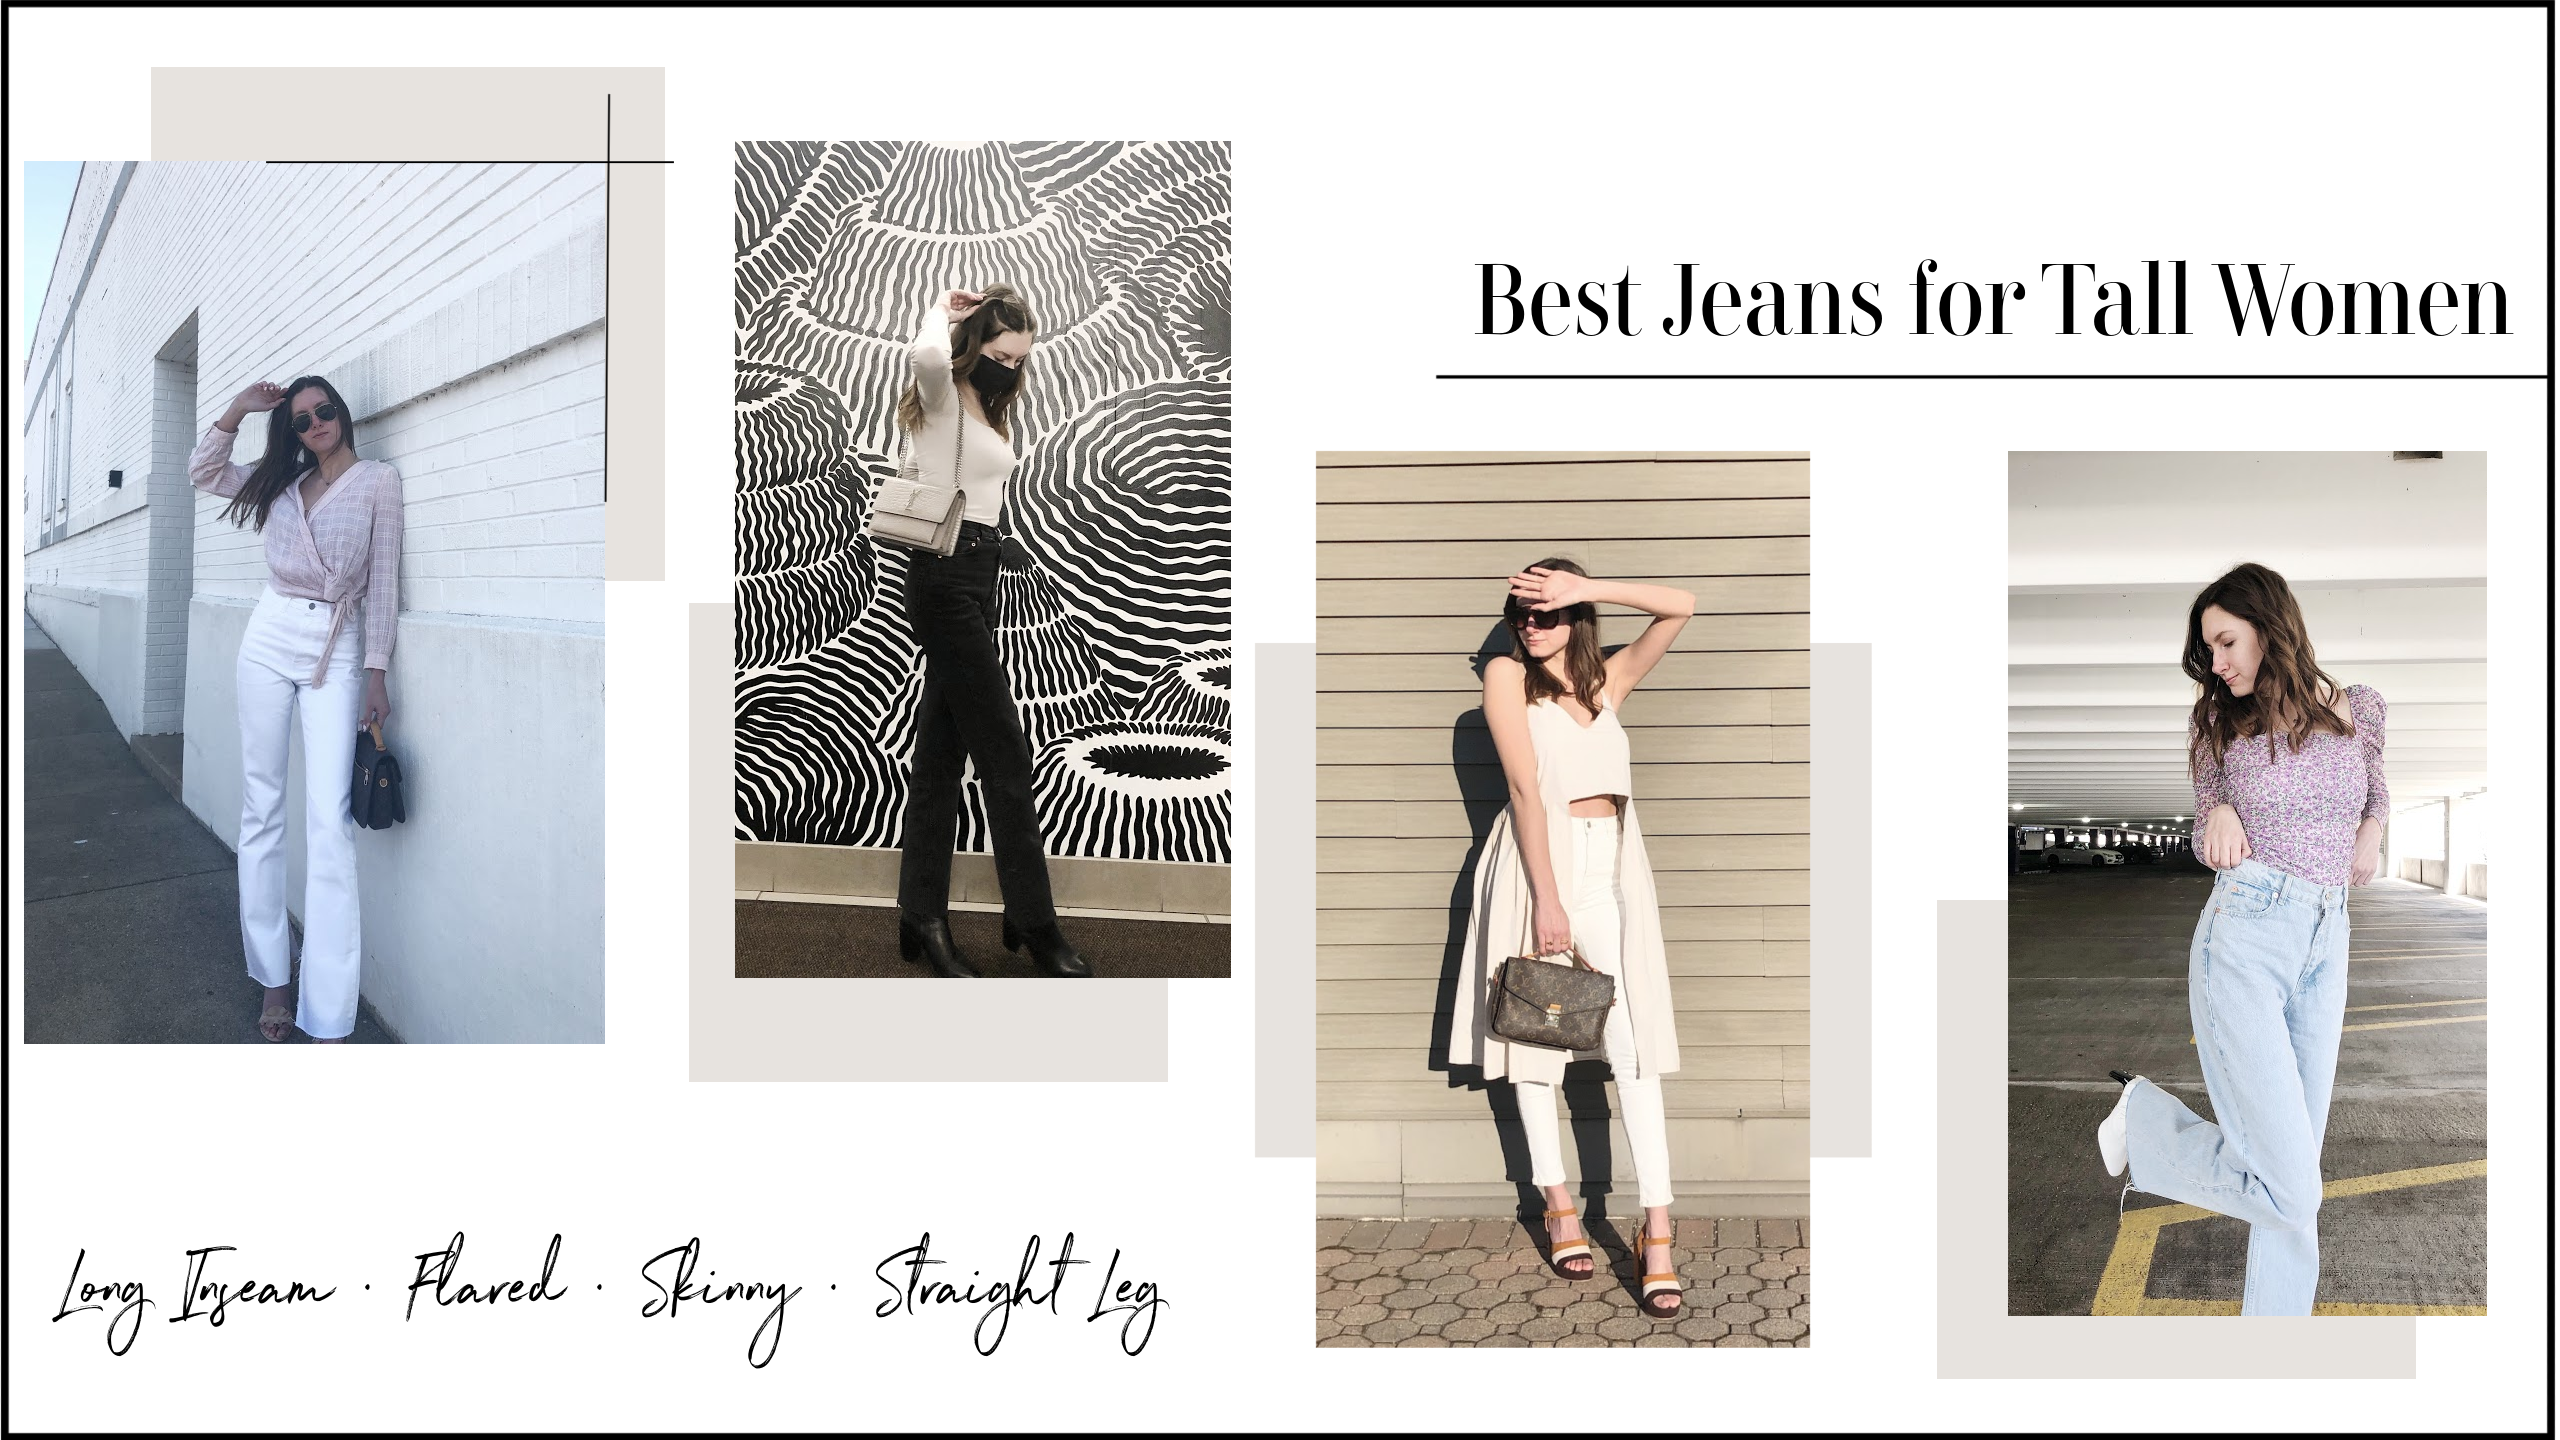 Best Jeans for Tall Women